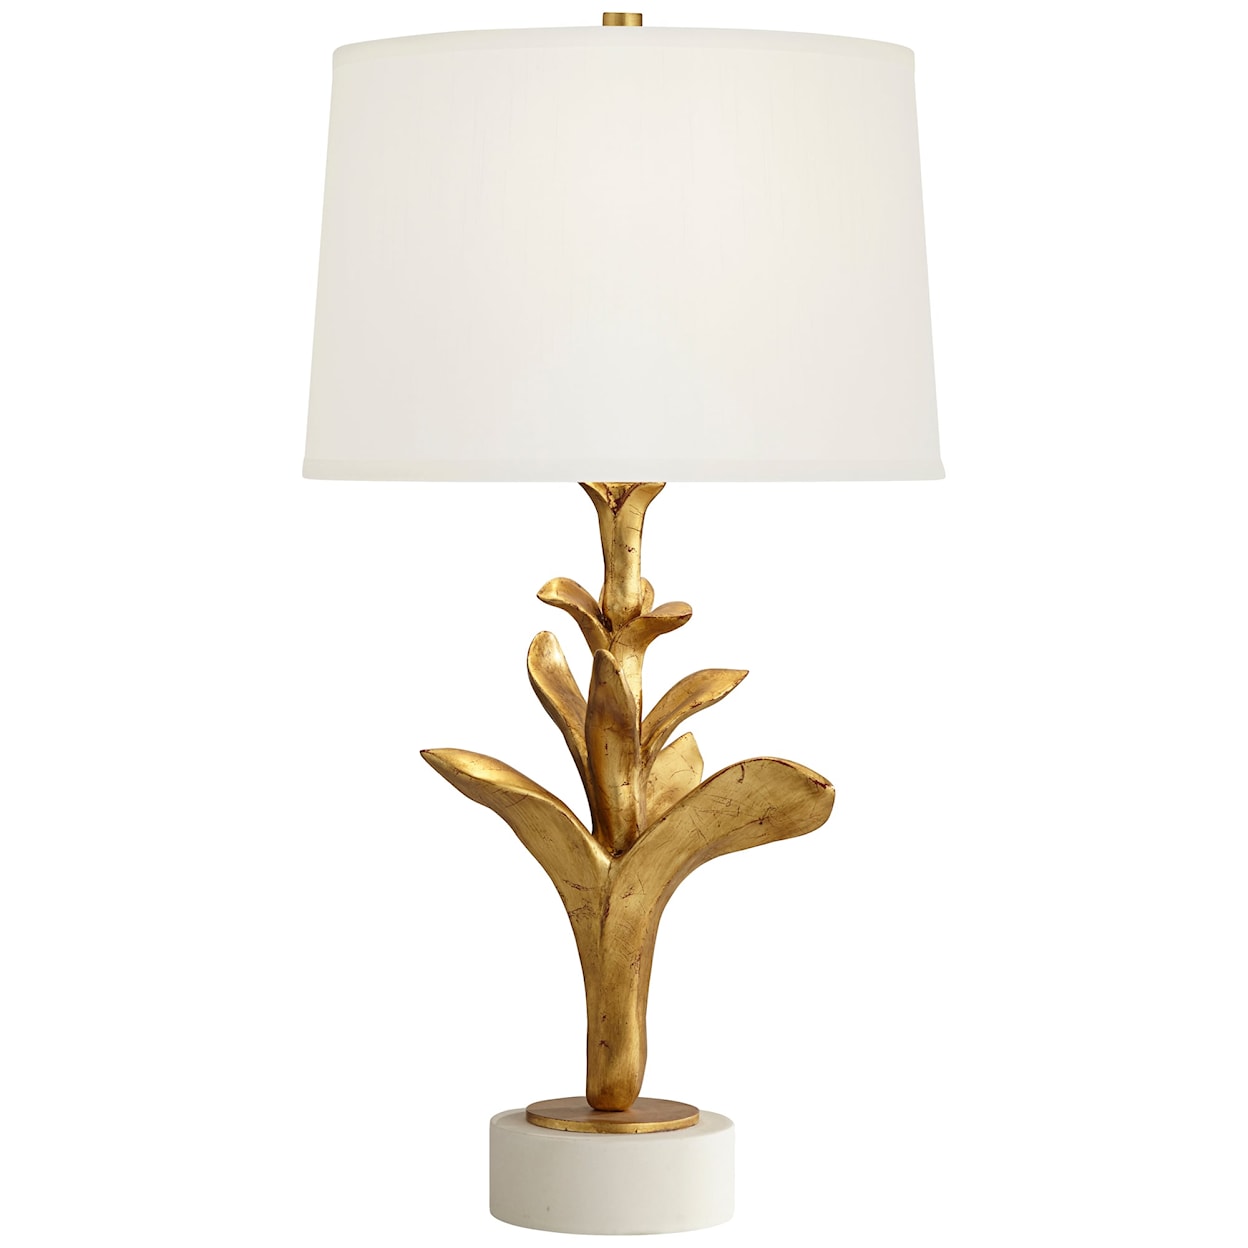 Pacific Coast Lighting Pacific Coast Lighting TL-Tree Branch with Leaves in Gold Leaf